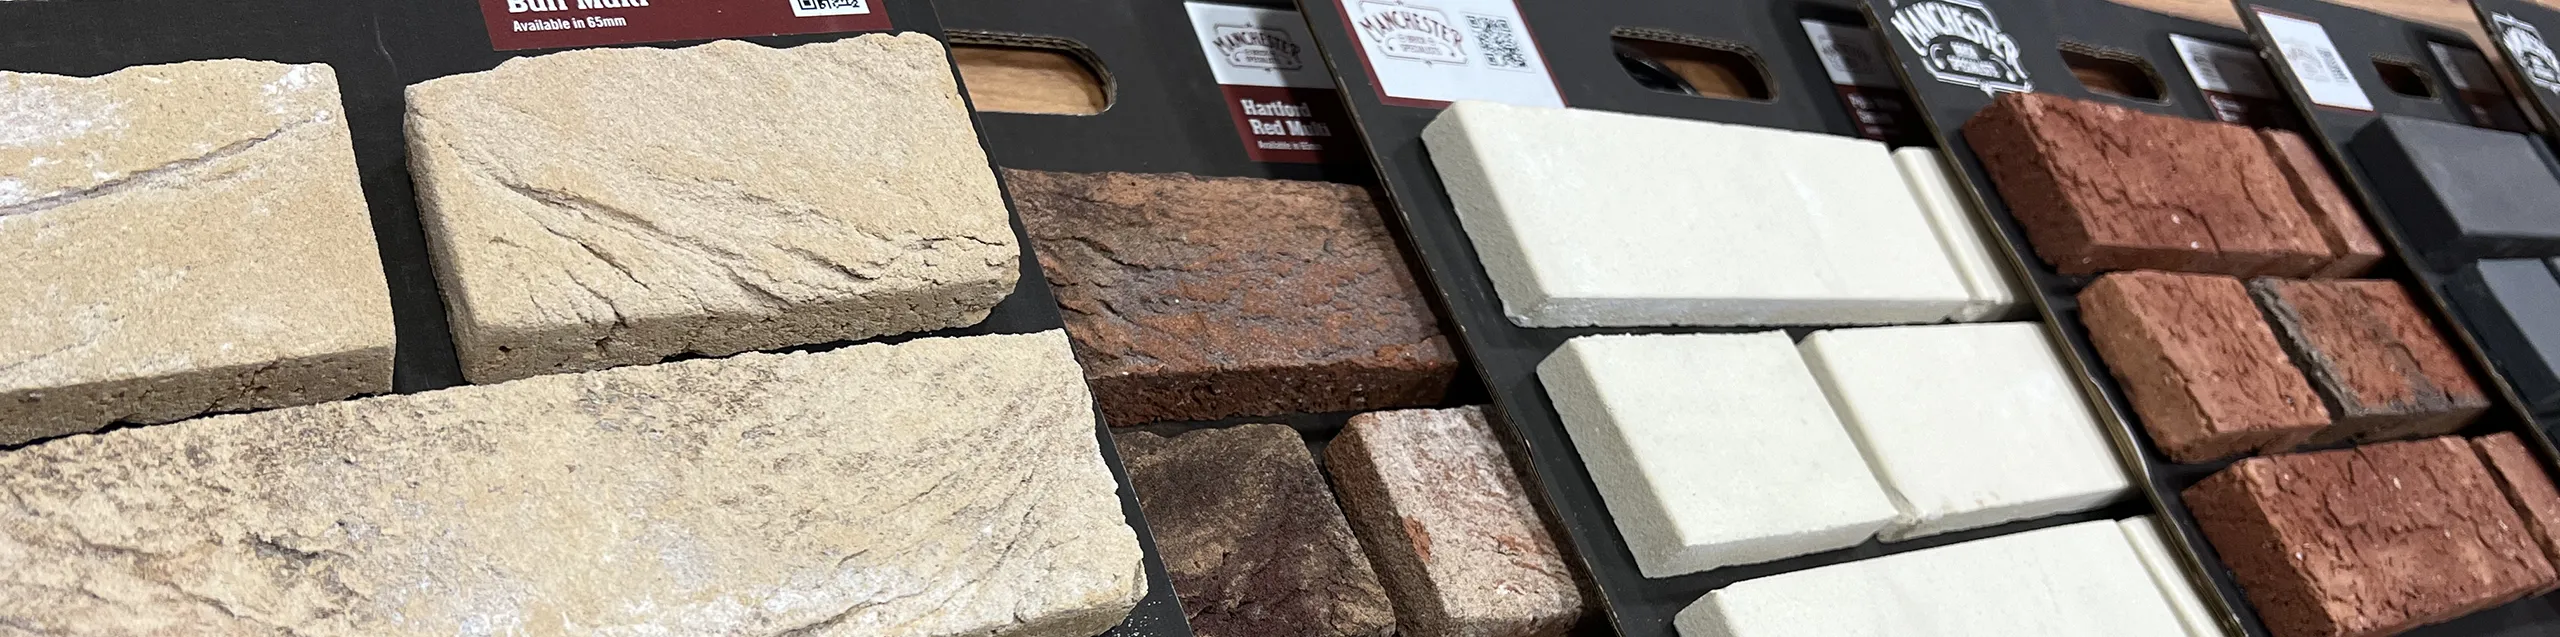 request a sample - brick products